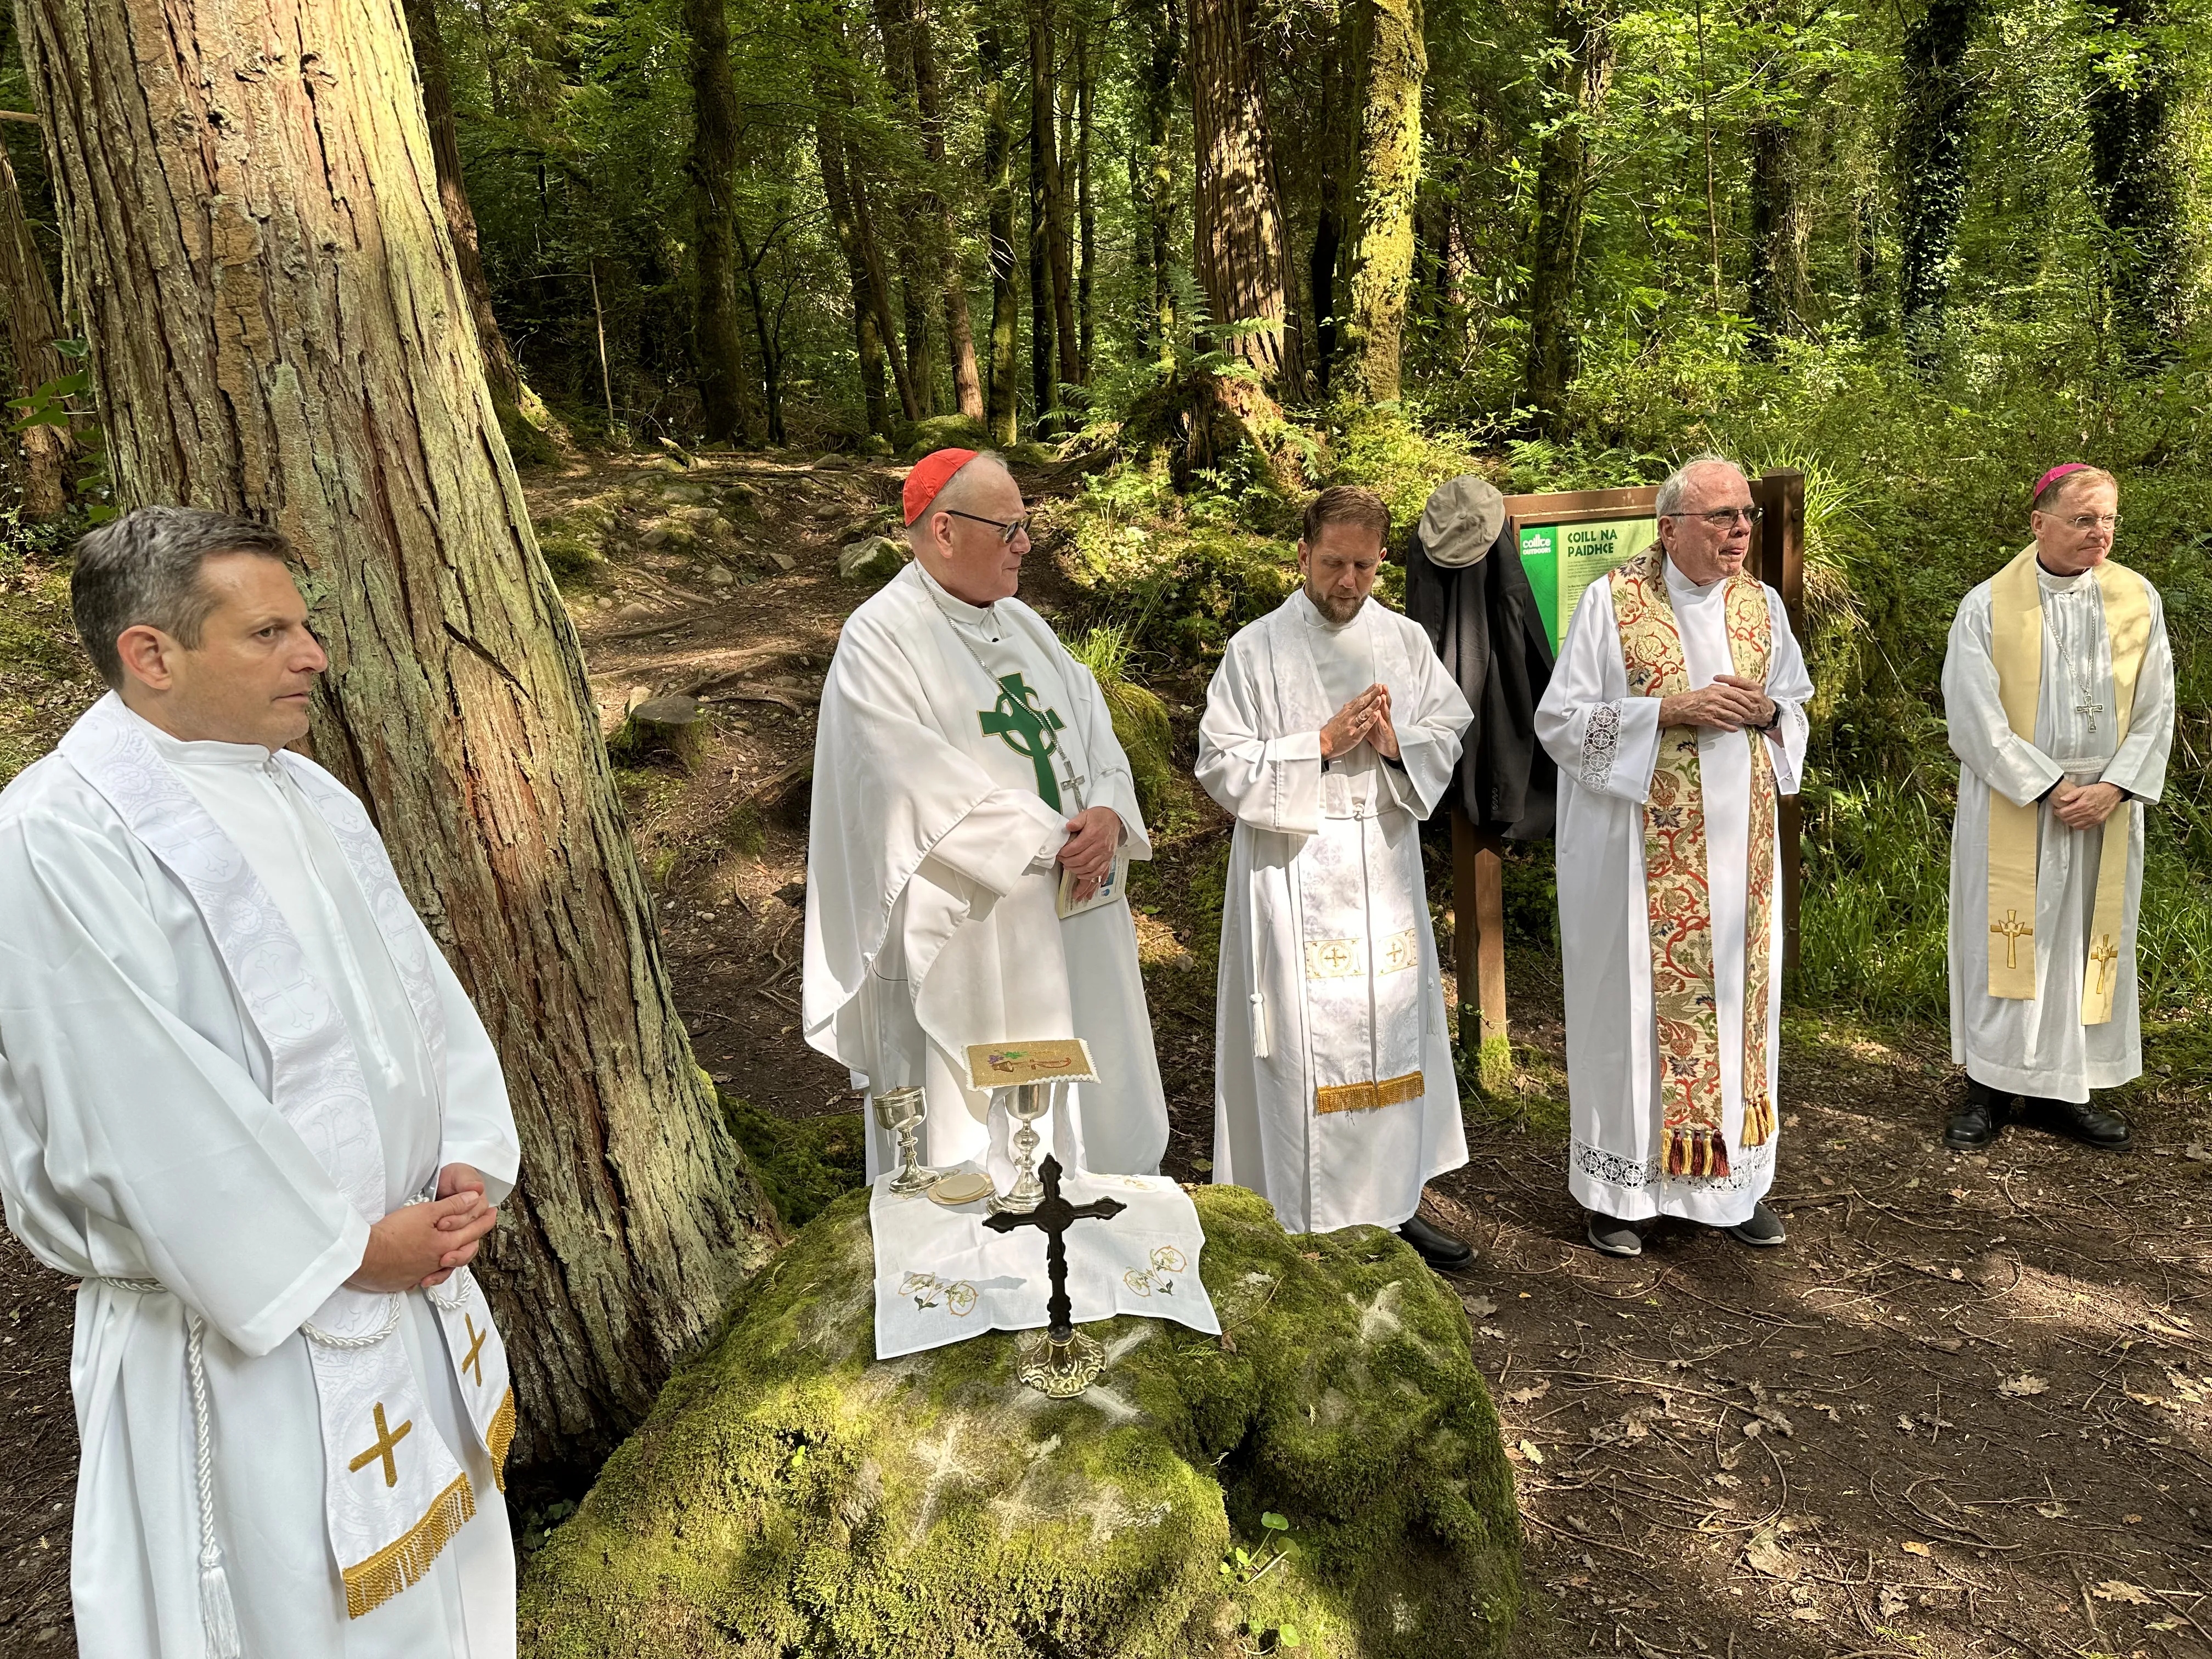 Irish-American Cardinal Timothy Dolan of New York celebrated Mass at a “Mass rock” in Killarney, County Kerry, Ireland, during a pilgrimage with roughly 40 people from the Archdiocese of New York on Aug. 21, 2023. Pictured left to right: Father Enrique Salvo, Cardinal Dolan, Father Stephen Ries, Monsignor Dennis Keane, Bishop Edmund Whalen, all from the New York Archdiocese.?w=200&h=150